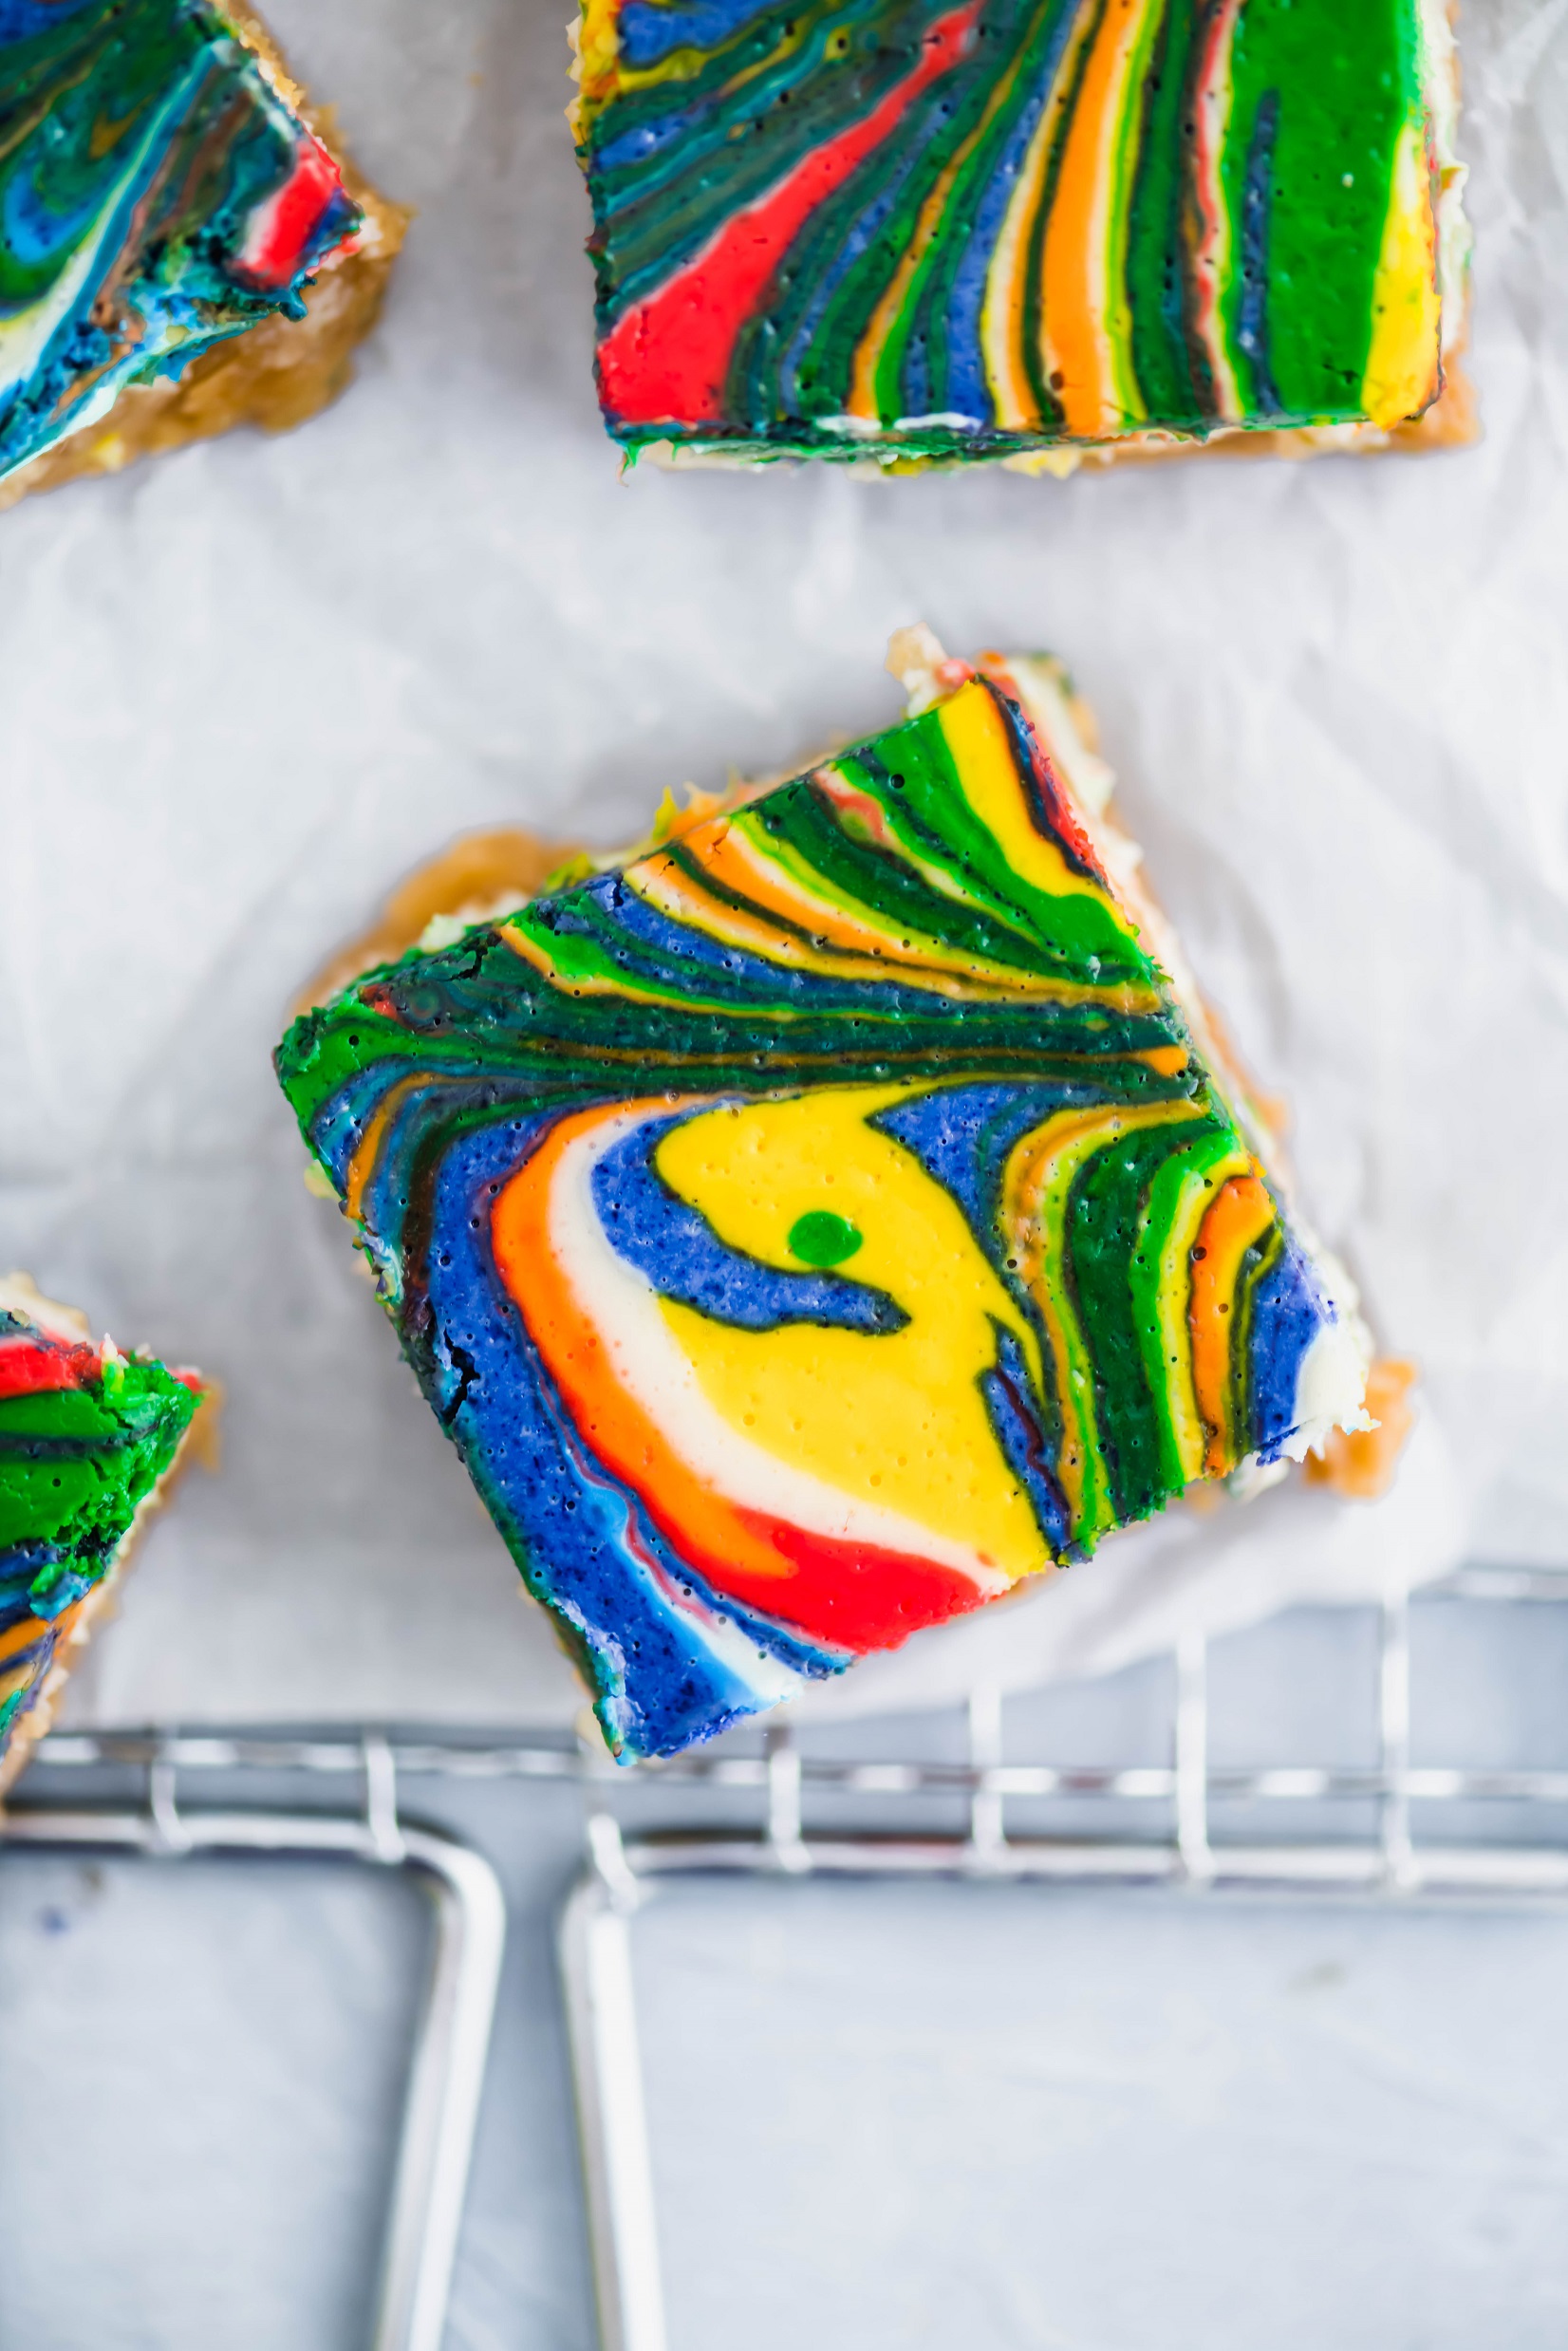 Rainbow Lemon Cheesecake Bars are a fun, festive way to celebrate St. Patrick's Day. Simple cheesecake is colored and swirled to make an adorable dessert.